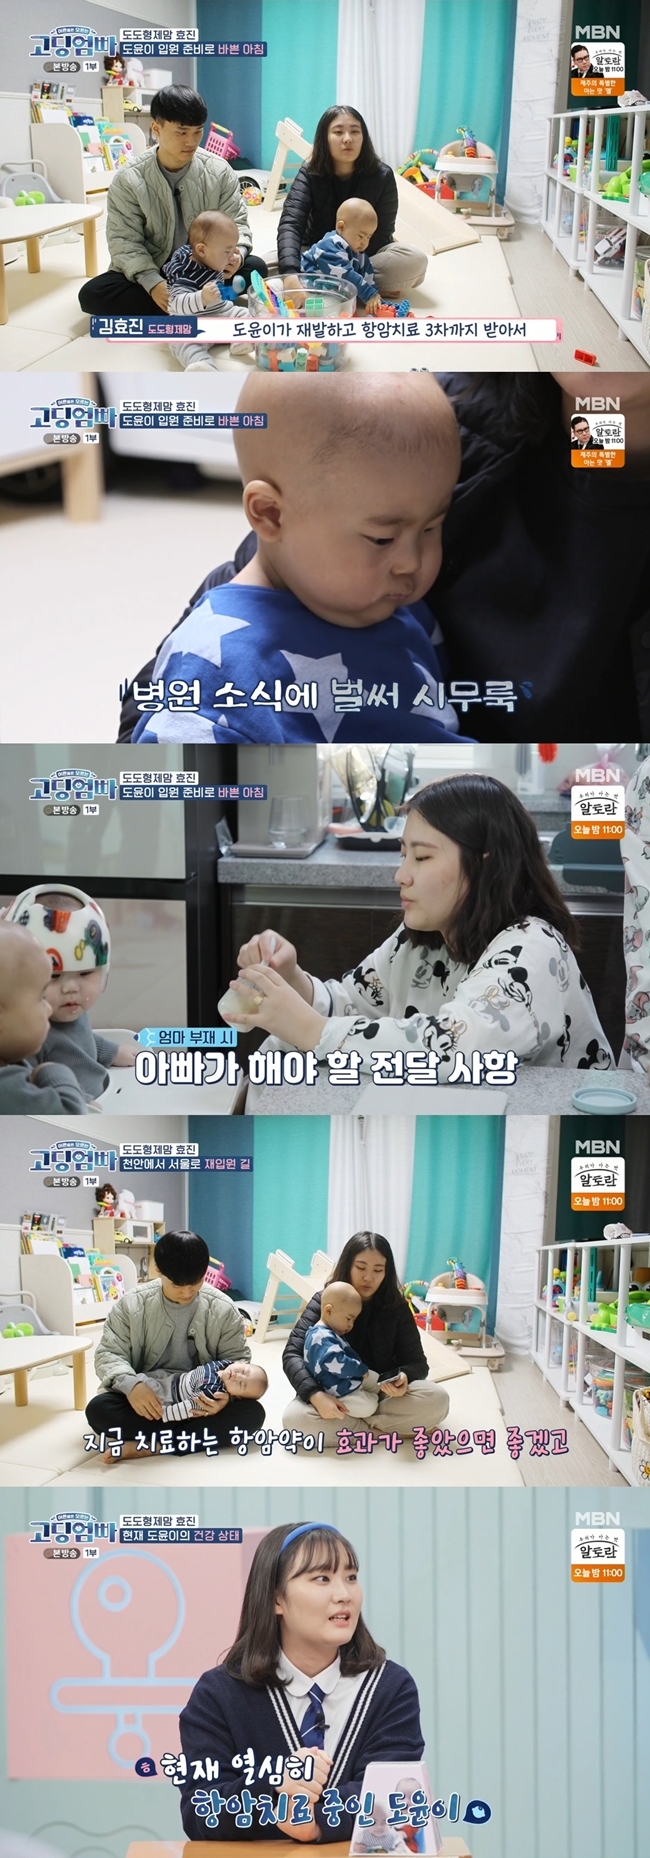 Kim Hyo-jin big son Doyun re-enters hospital for ChemotherapyOn MBN goddingumpa broadcast on April 2, two son-mam Kim Hyo-jin daily life was drawn.Kim Hyo-jin has revealed the story of a big son Doyun who is suffering from cancer due to rhabdomyosarcoma, but recently Doyun has a tumor metastasized to his face and thigh and has to be removed again.Kim Hyo-jin said, The inspection is needed to recur and receive the third Chemotherapy so that we can plan for treatment in the future. According to the MRI inspection results, Doyun will have surgery to remove the recurrent tumor on the face and the metastatic thigh tumor. Before Son Doyun was re-admissioned, Kim Hyo-jin started a busy morning, feeding her own baby food and packing up the necessary luggage.Doyun Lee seemed to know that he had to go to the hospital.Kim Hyo-jin carefully wrote down what he needed for Doyun and Husband to stay at home before leaving, and second son.Park Mi-sun said, I hope Hyo-jin will come in with the same daughter-in-law.Kim Hyo-jin Family moved to Seoul to re-enter sonKim Hyo-jin said, I hope that the anticancer drug that I treat now will be effective and I hope that the treatment will flow in a good direction because of the good inspection results.Kim Hyo-jin, who saw VCR, said in a studio interview, So far, the tumor has been reduced because of the Chemotherapy effect.Now, Chemotherapy is in the fourth phase. When it recurs or spreads far, it is said that surgery is not possible in principle.Doyun has been treated since he was a child and said that it is possible to operate, not thigh bones. There is no way to do this surgery. 